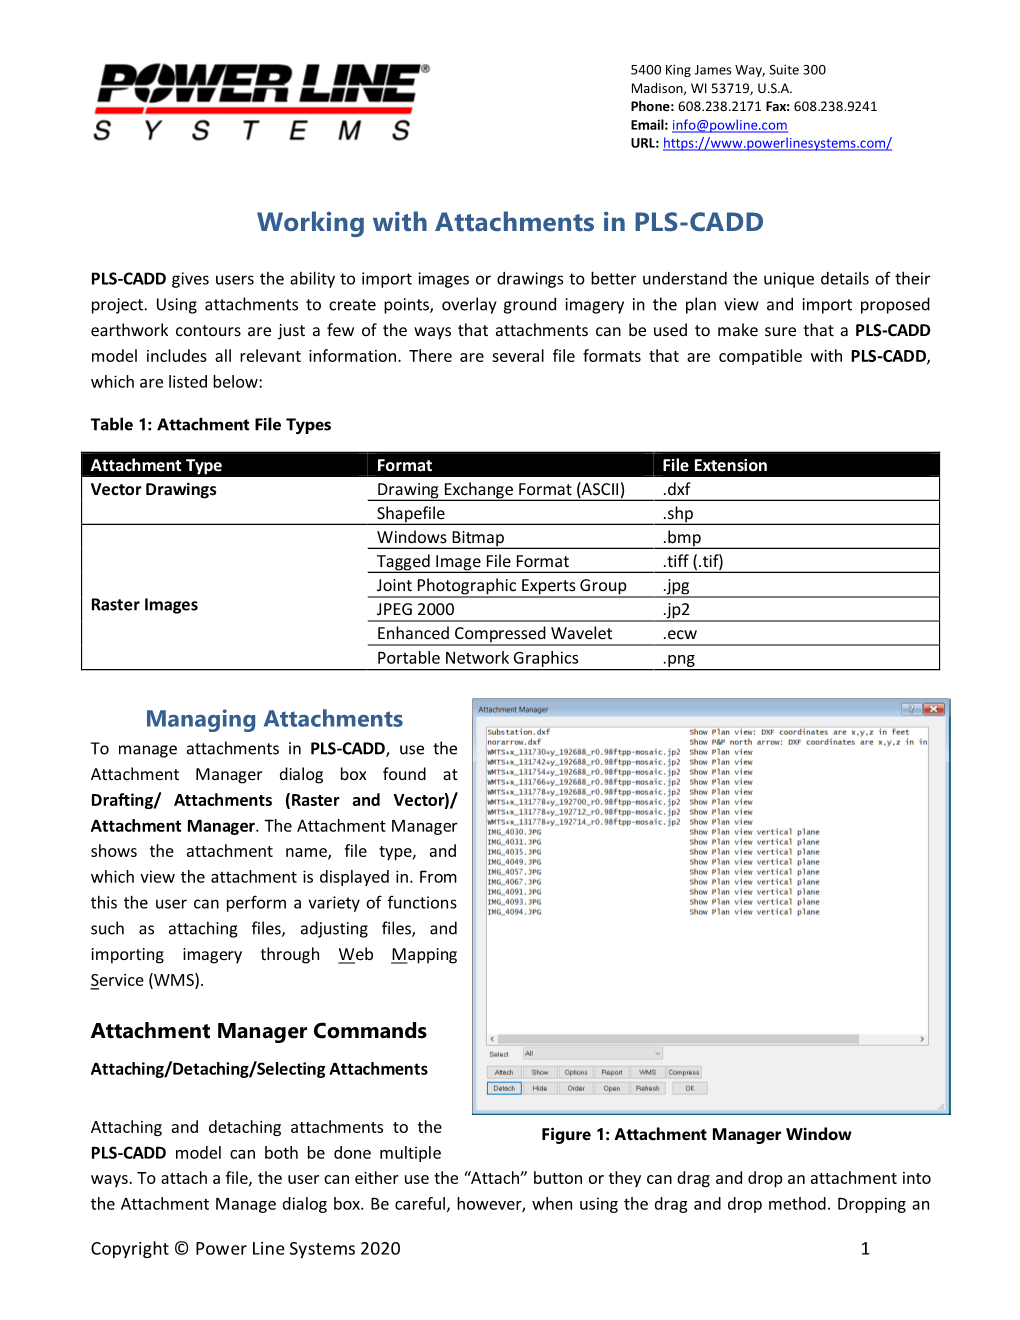 Working with Attachments in PLS-CADD